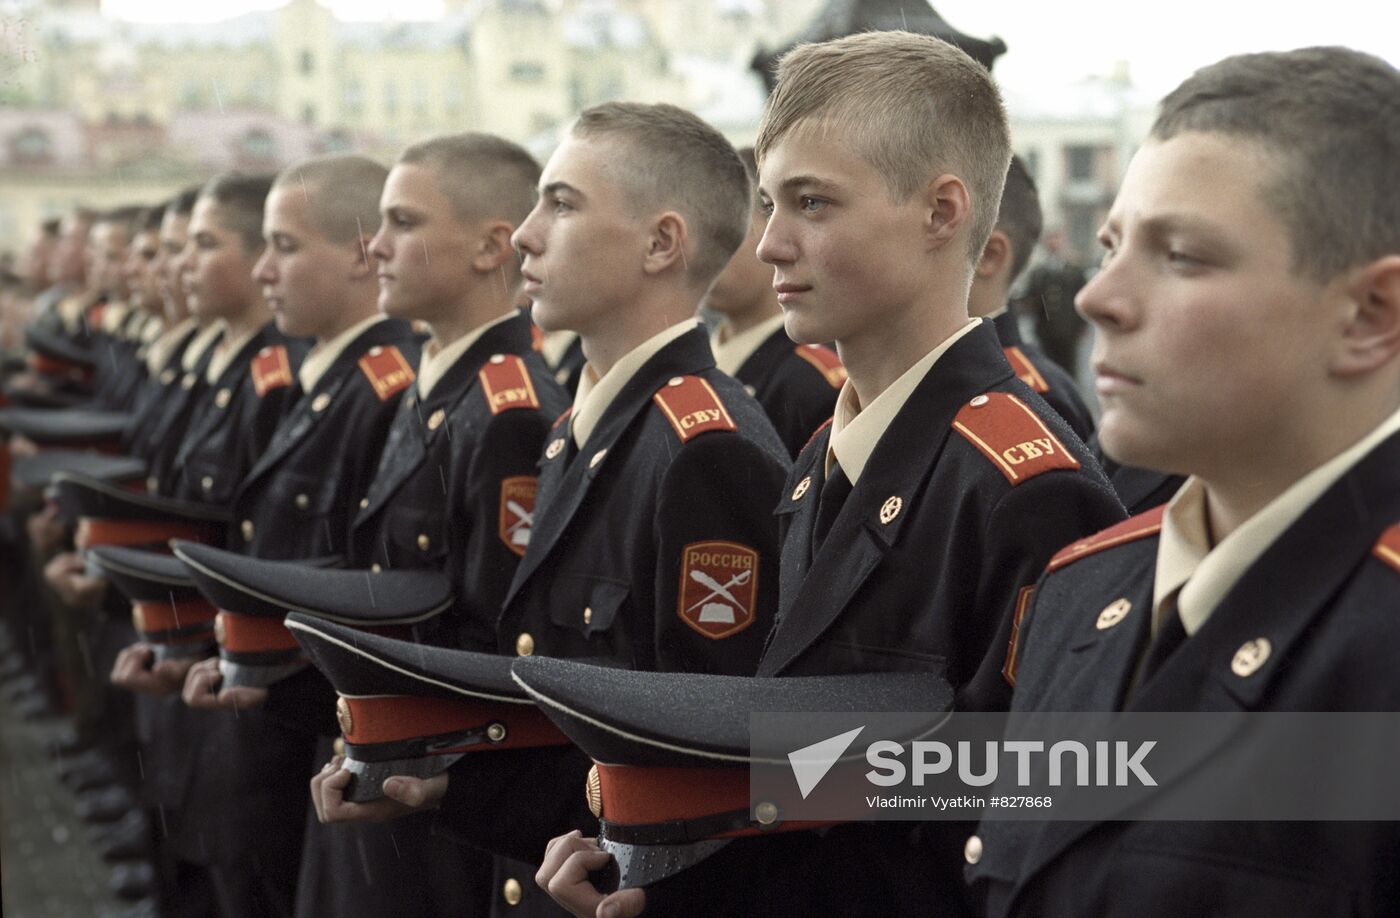 Ceremony of initiation into Suvorov Military School students